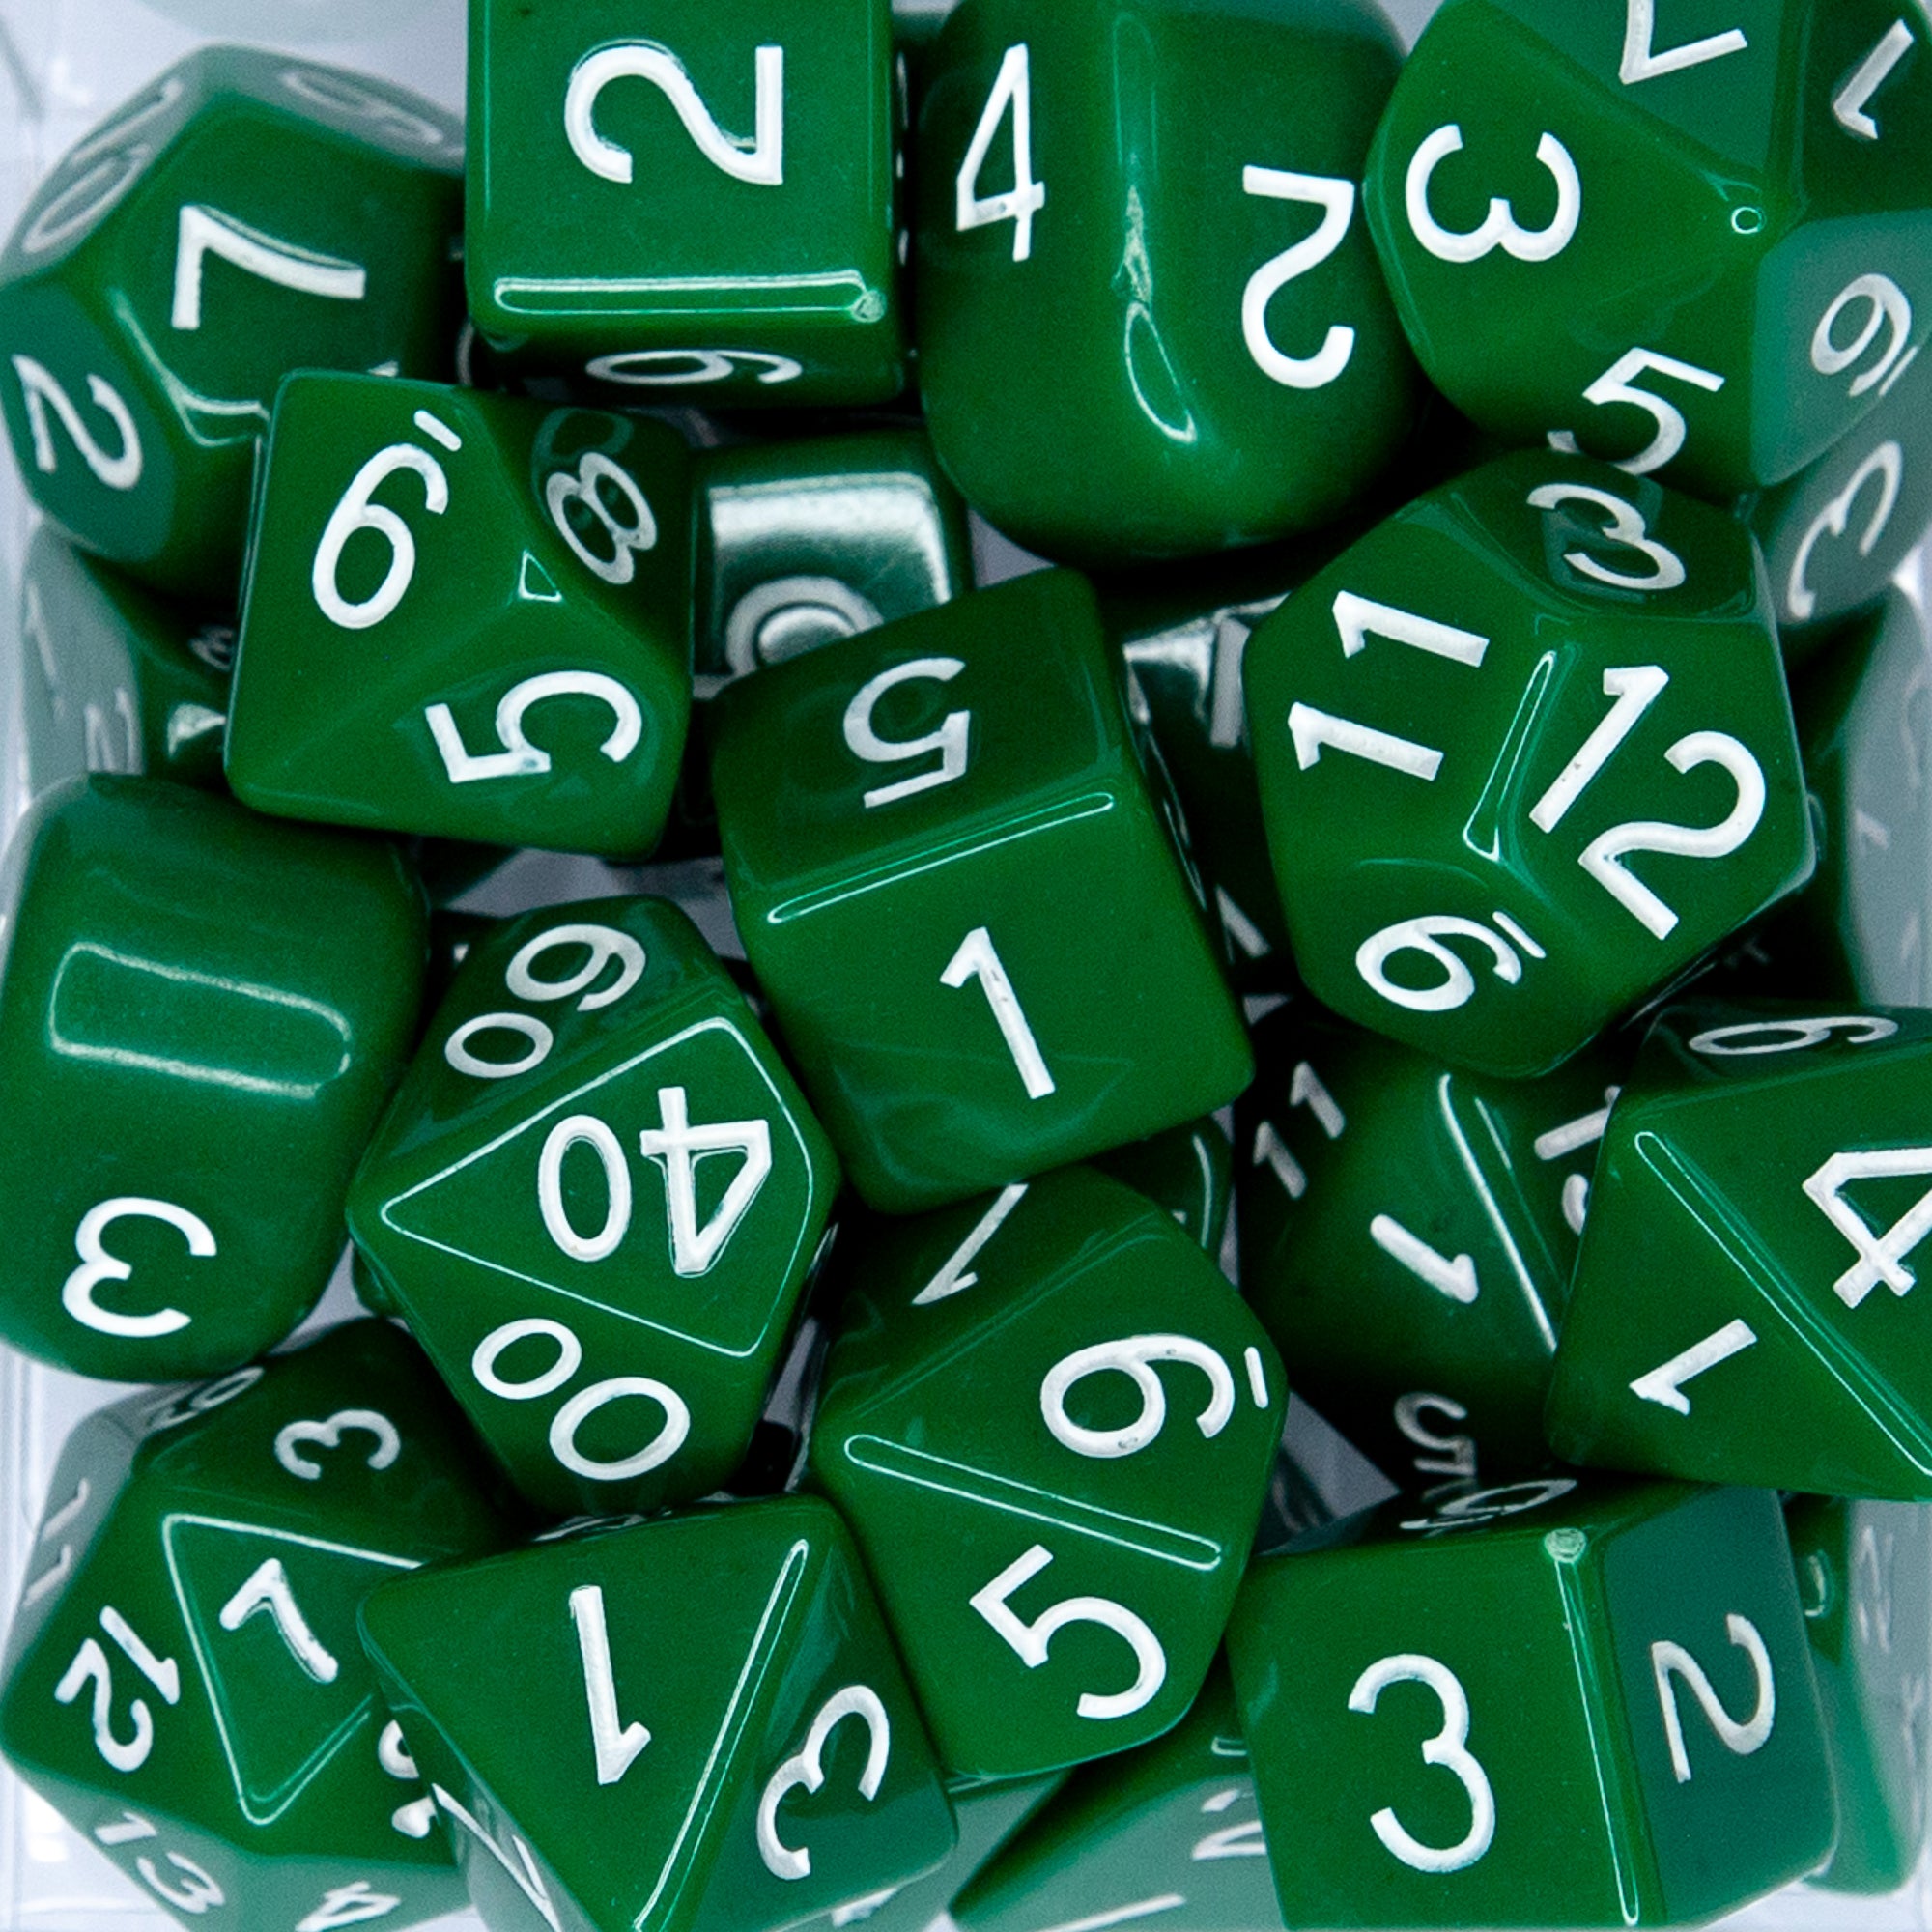 Role 4 Initiative 12D6 Opaque Dice Dark Green w/ White Pips - A Muse N Games